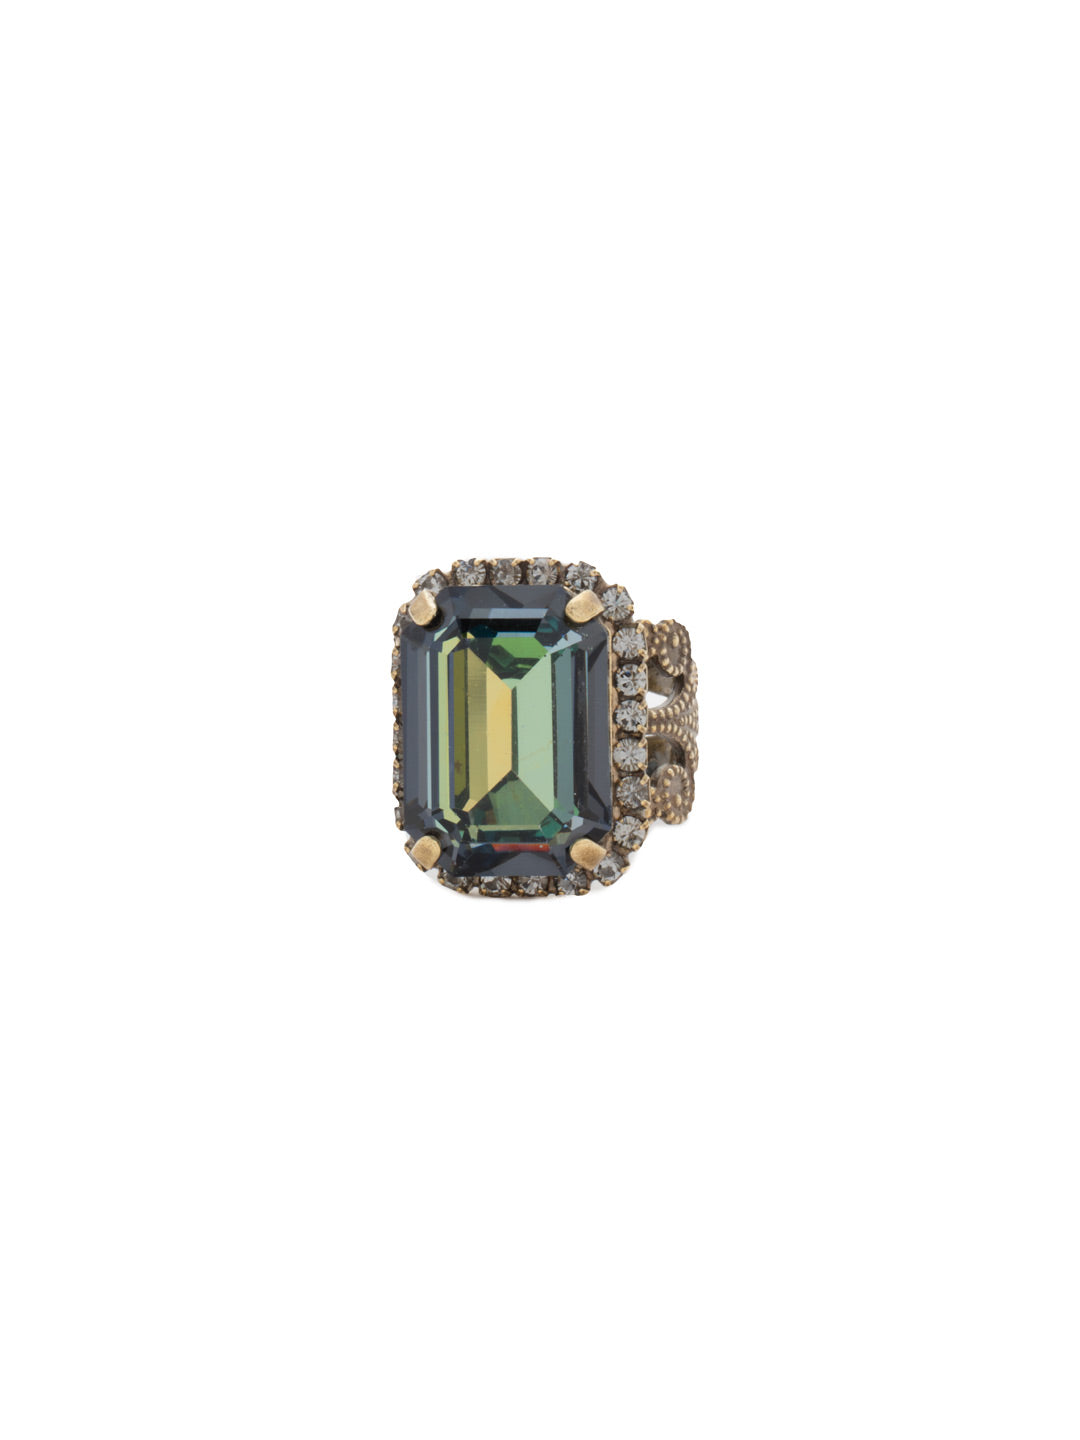 Petite Emerald-Cut Cocktail Ring - RCF9AGCRP